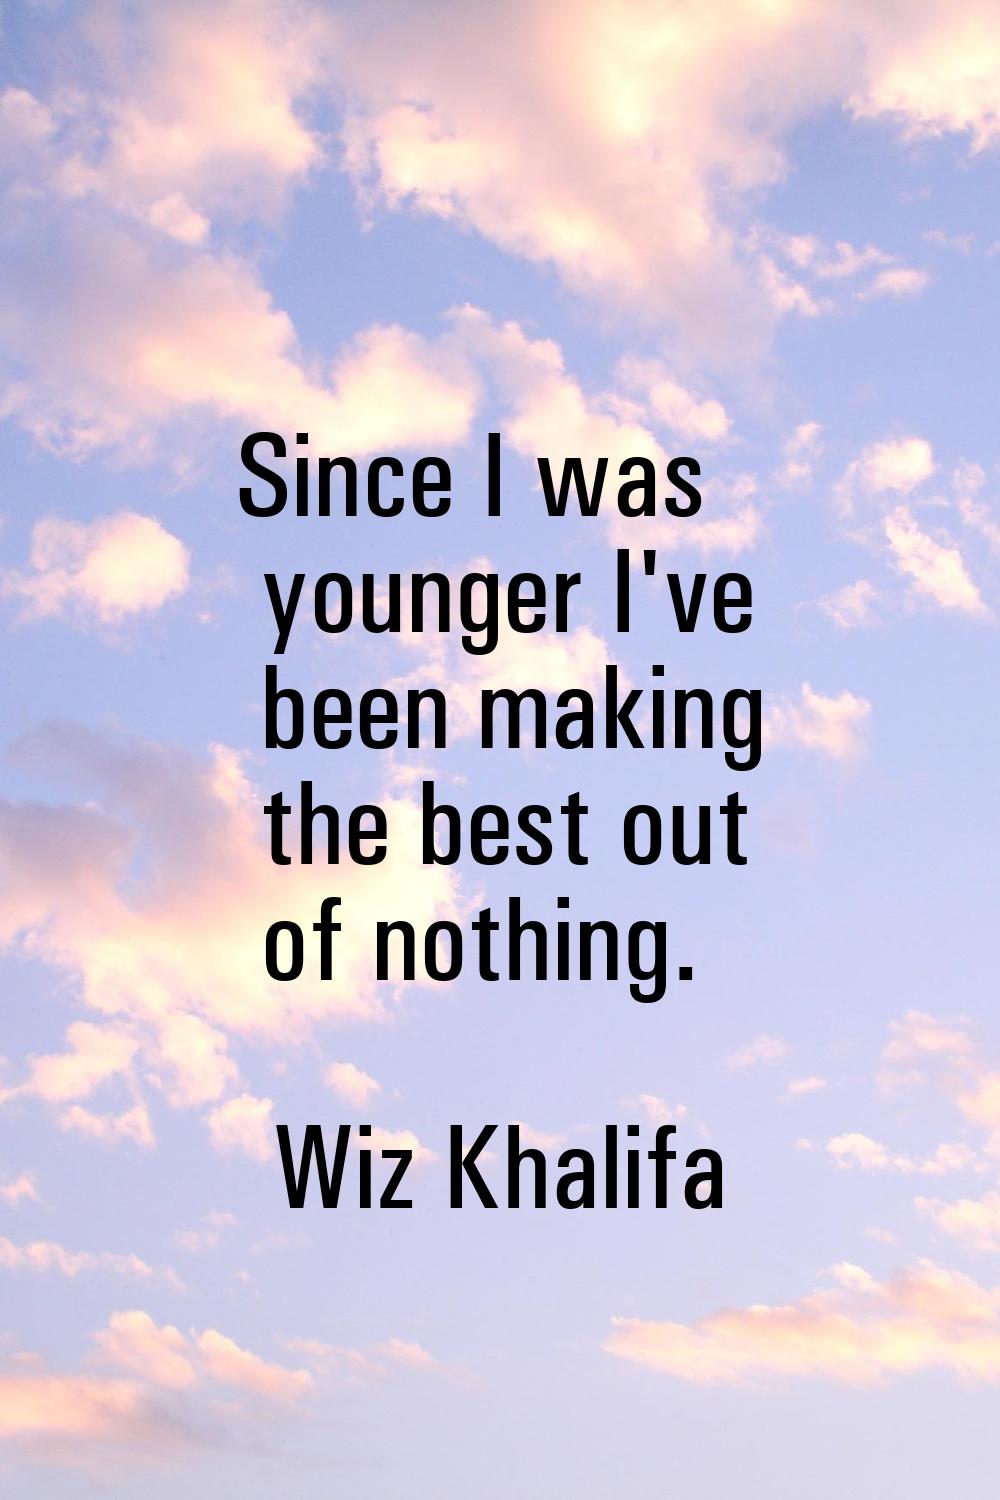 Since I was younger I've been making the best out of nothing.